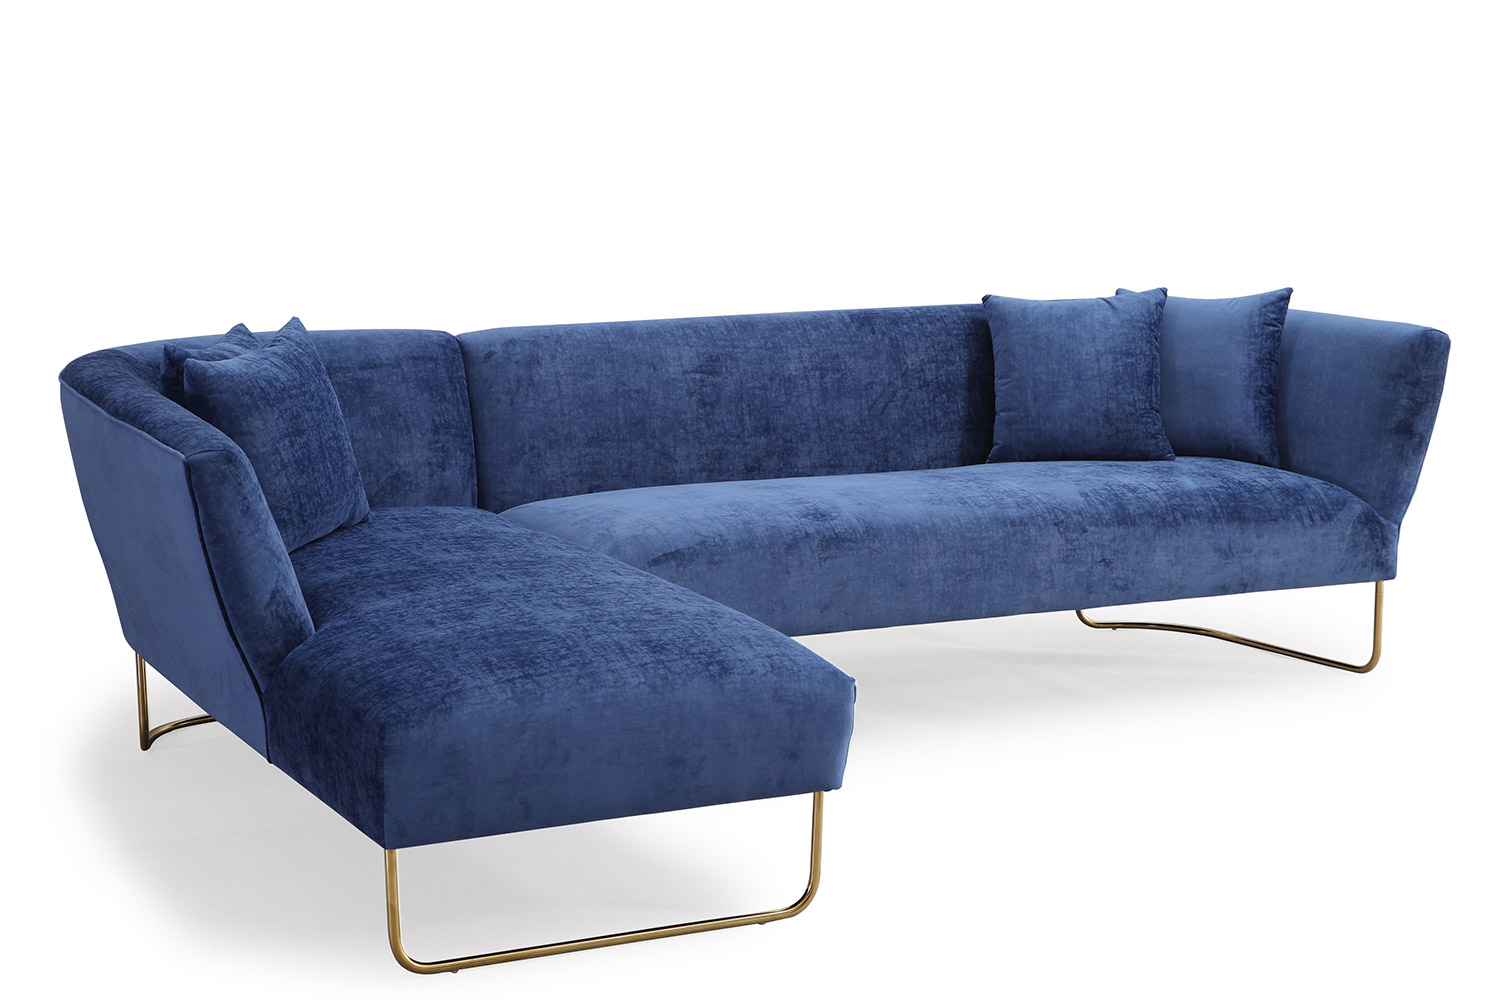 TOV Furniture Caprice LAF Sectional Sofa - Navy